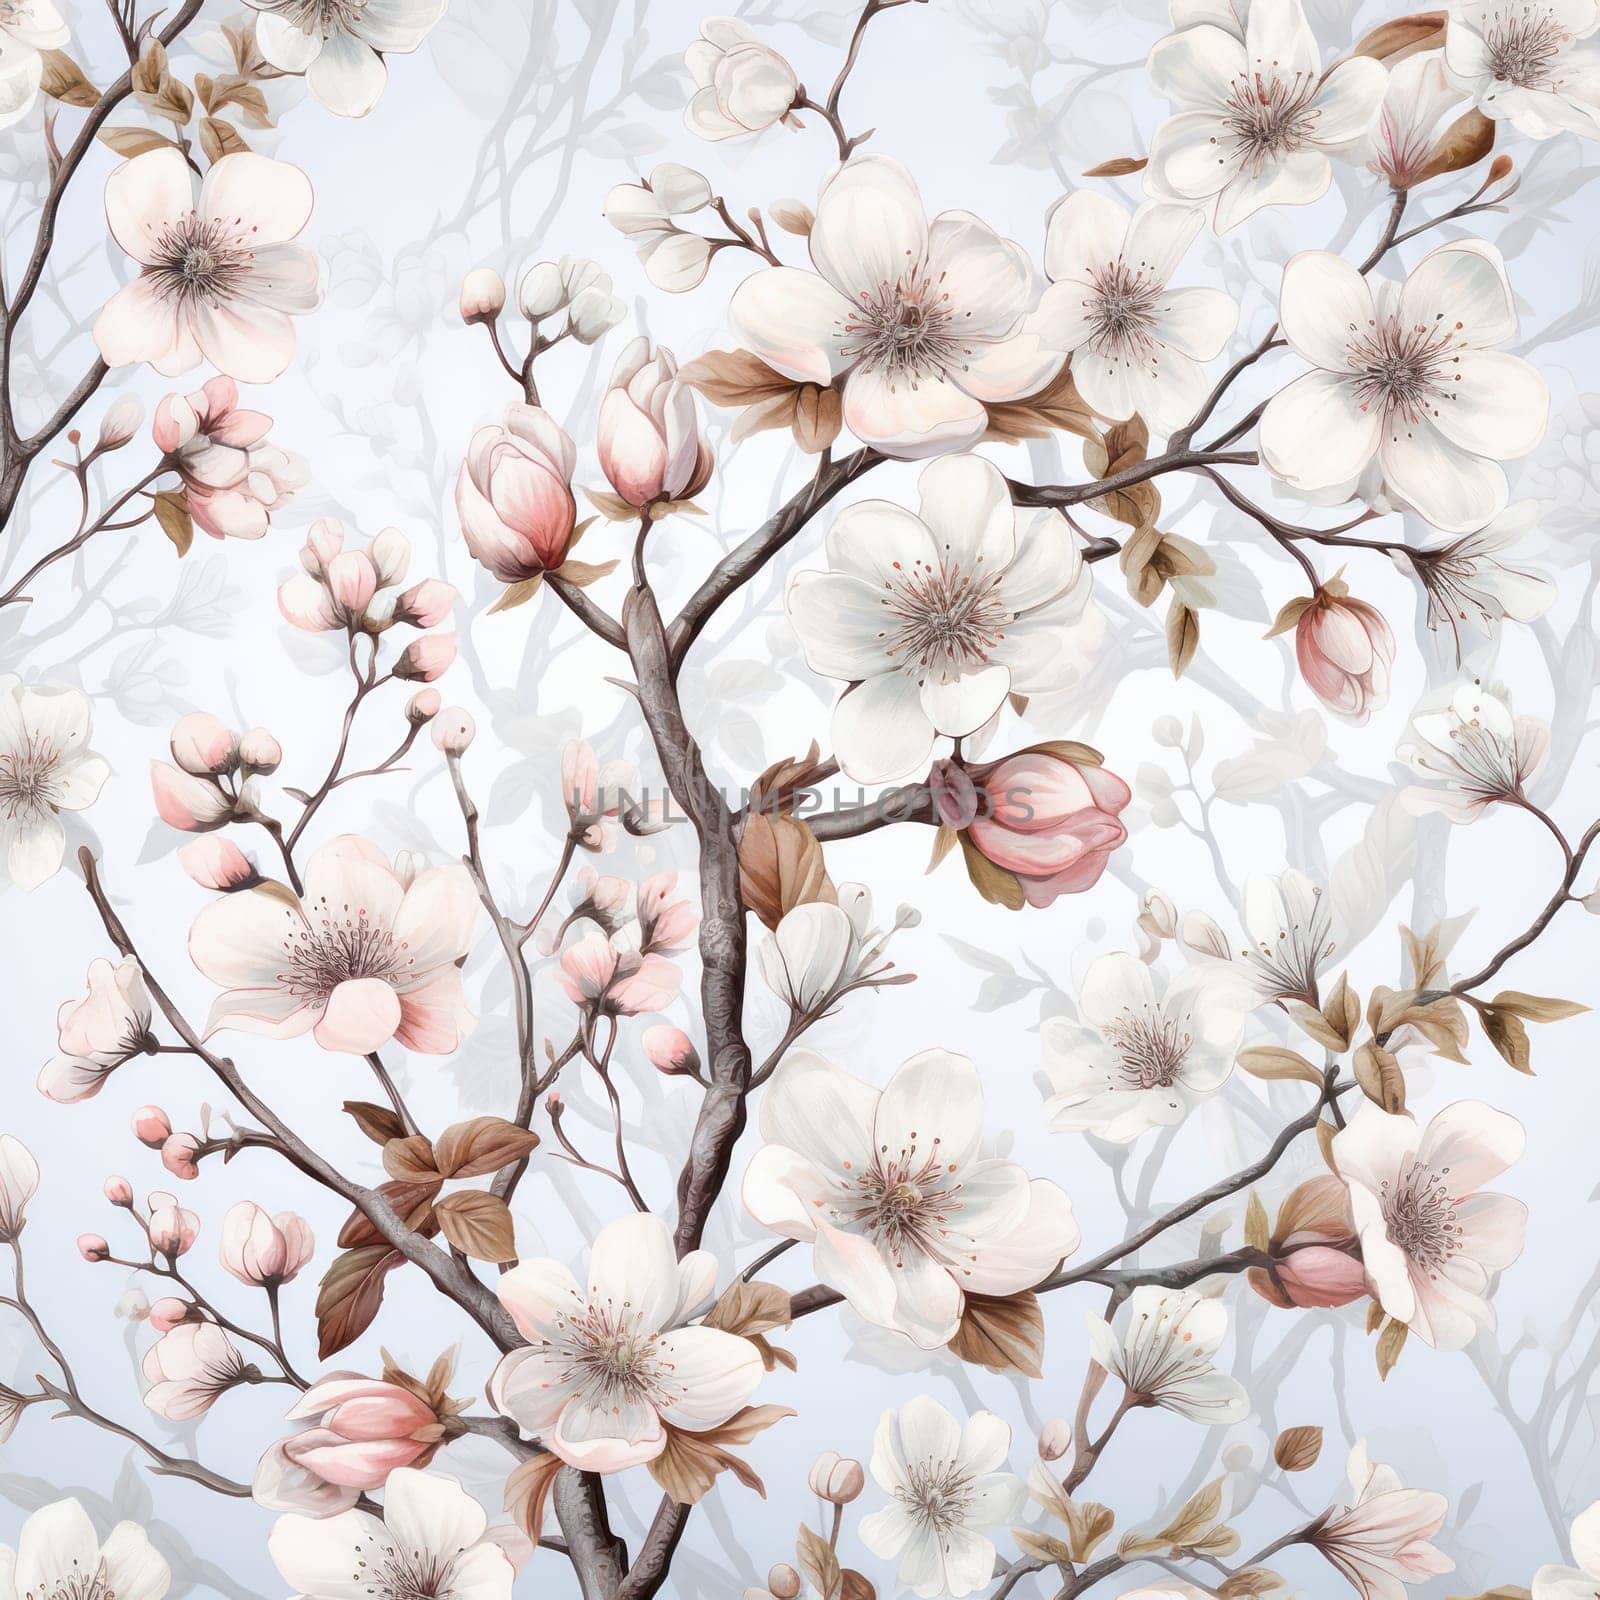 Spring Blossom: A Delicate Floral Symphony in Pink on a White Cherry Tree Branch, Creating a Seamless Watercolor Wallpaper of Romantic Japanese Elegance by Vichizh